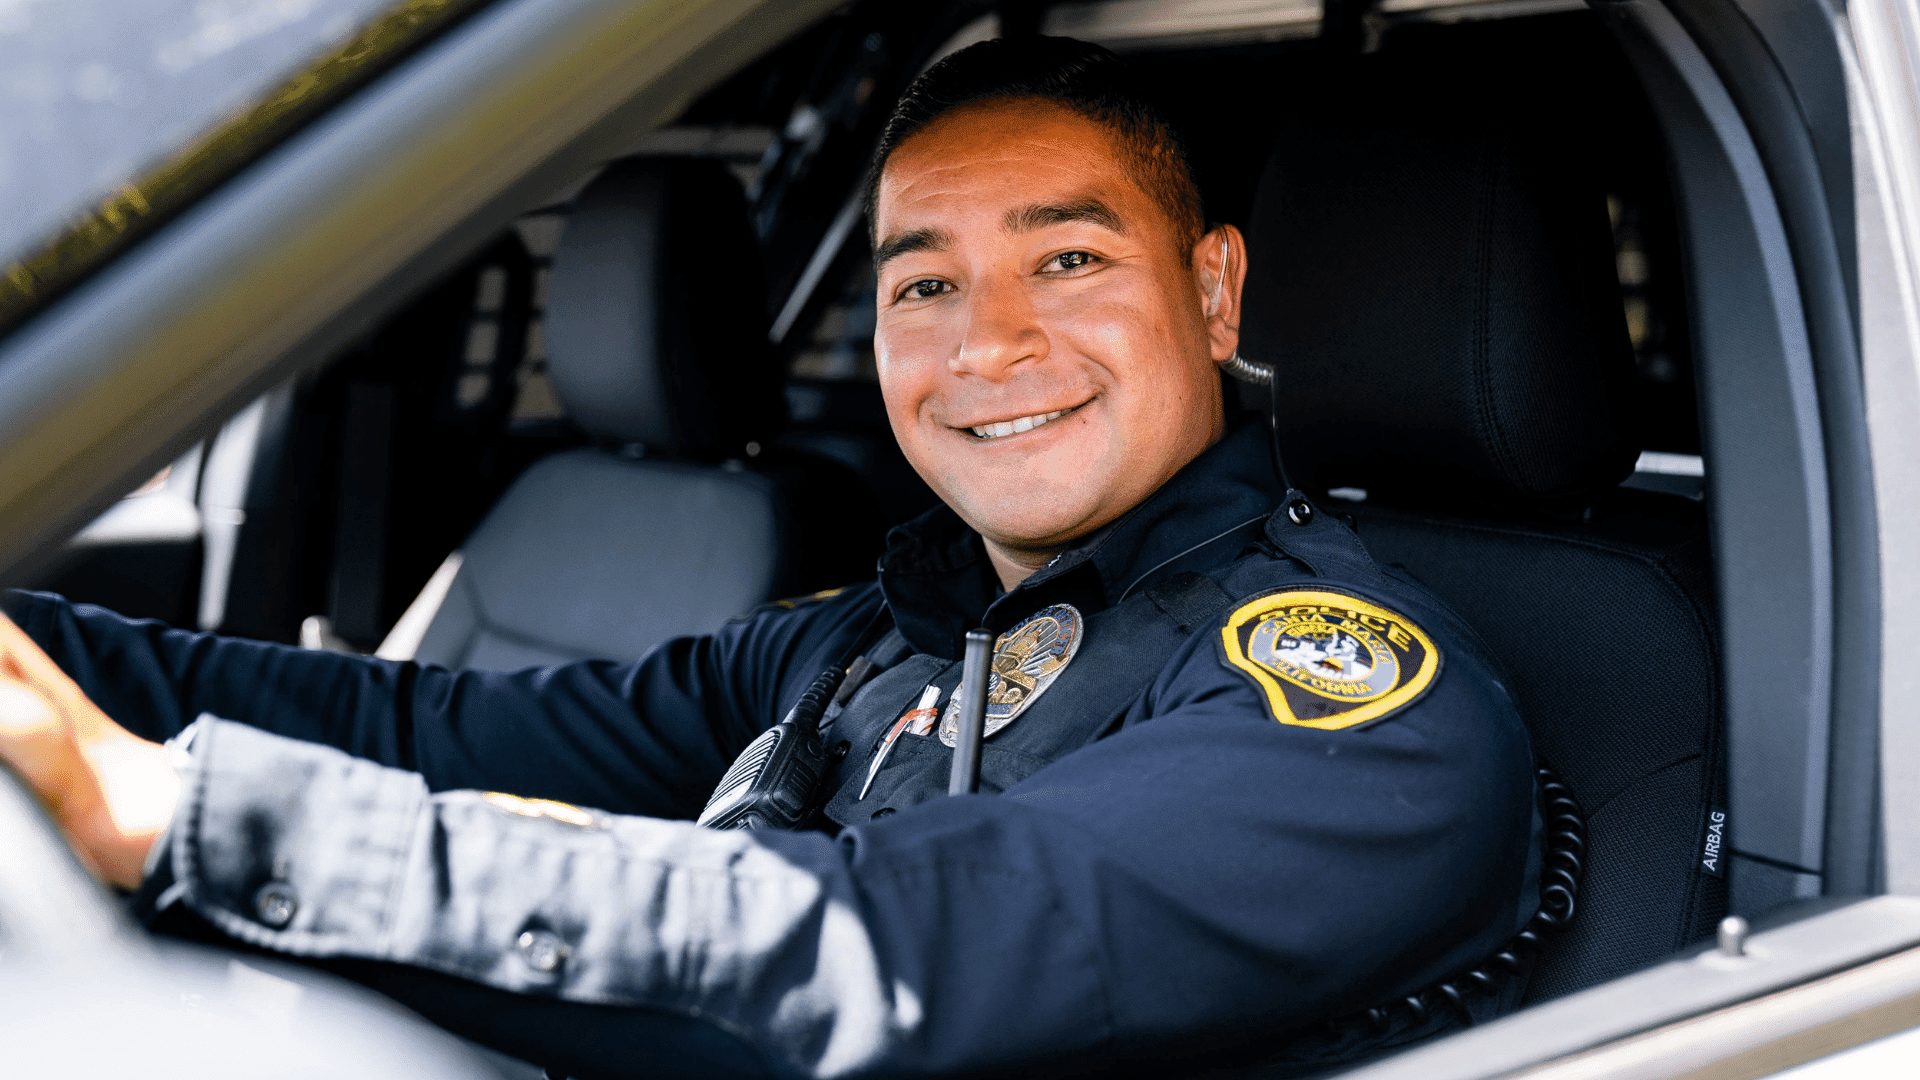 Santa Maria Police Officer Jesus Caro poses for a photo while seated in his patrol vehicle